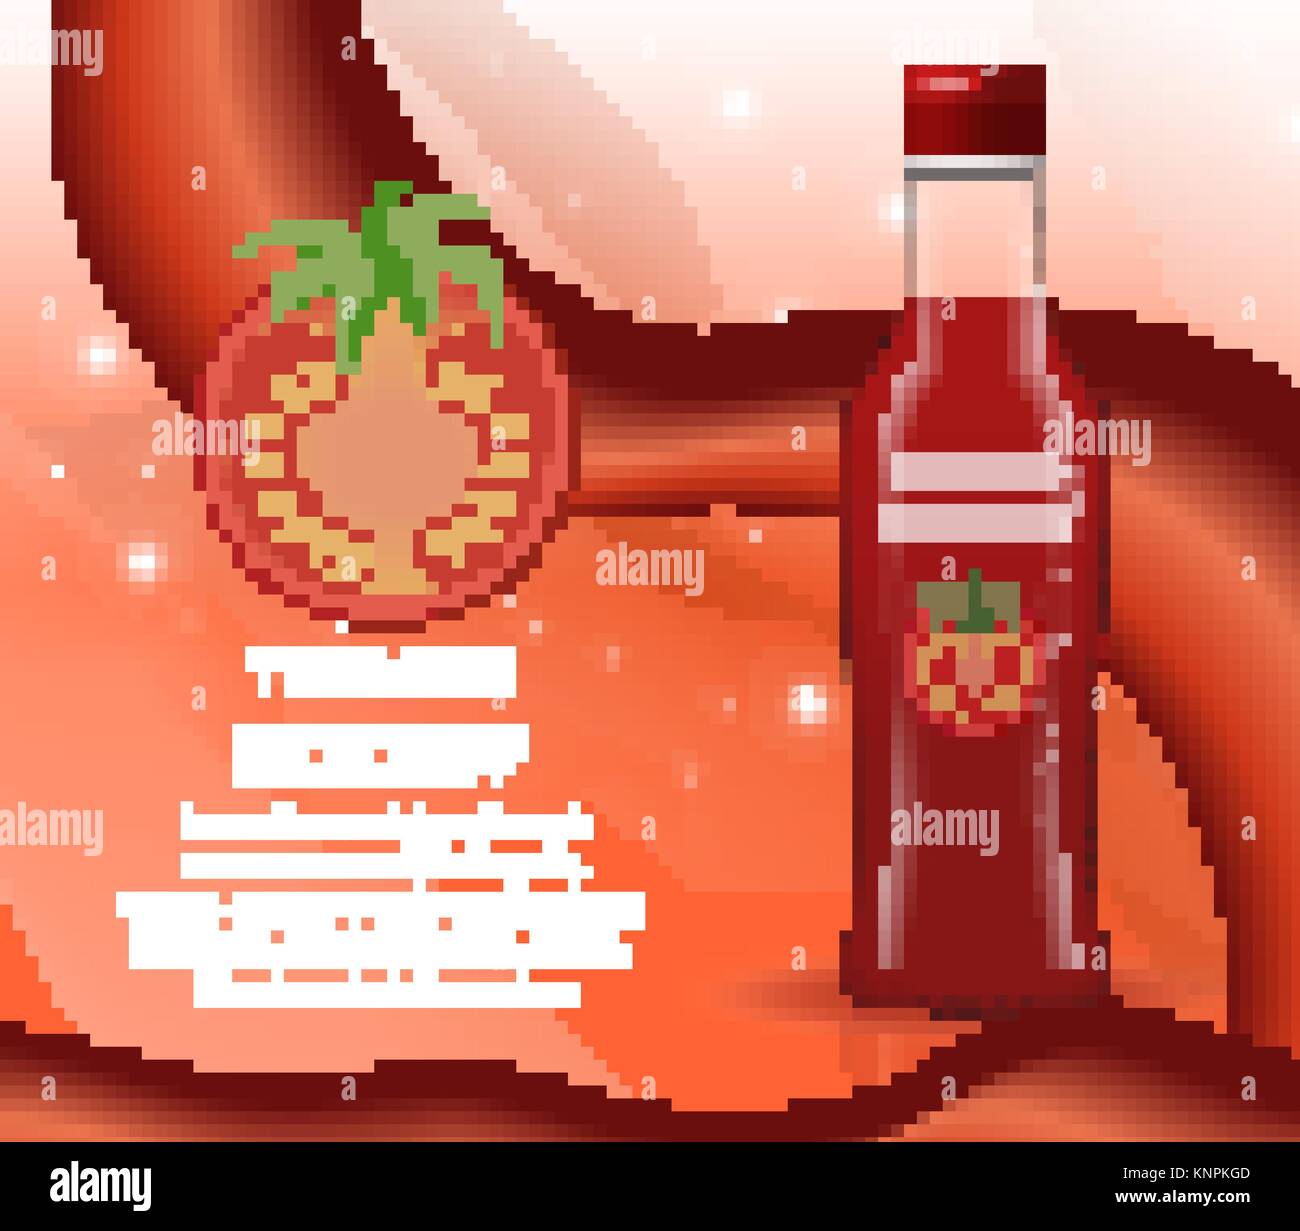 https://c8.alamy.com/comp/KNPKGD/tomato-ketchup-in-a-glass-bottle-3d-realistic-style-papkrika-red-sauce-KNPKGD.jpg